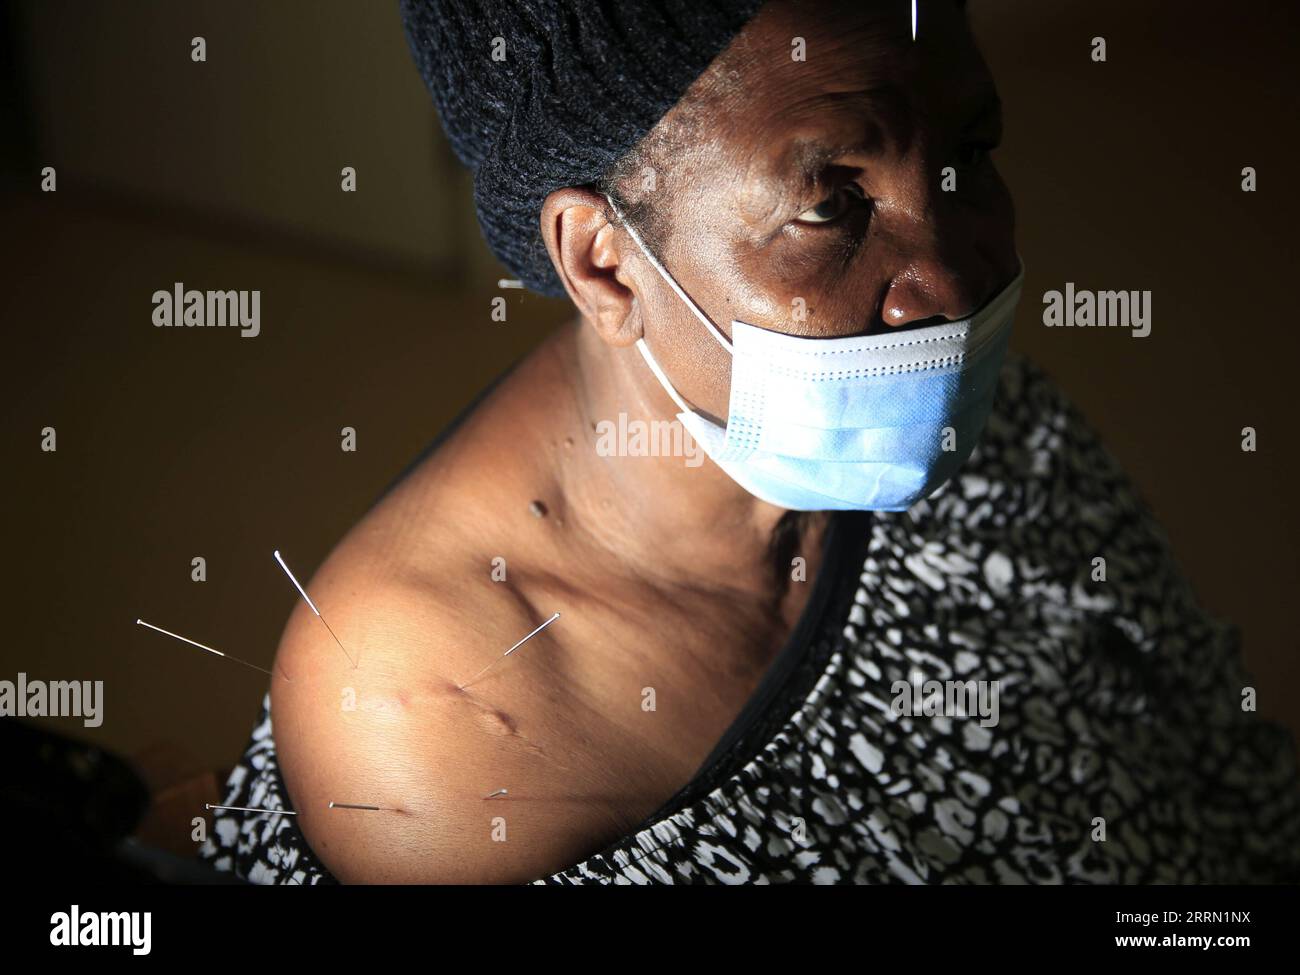 221128 -- HARARE, Nov. 28, 2022 -- A woman receives acupuncture